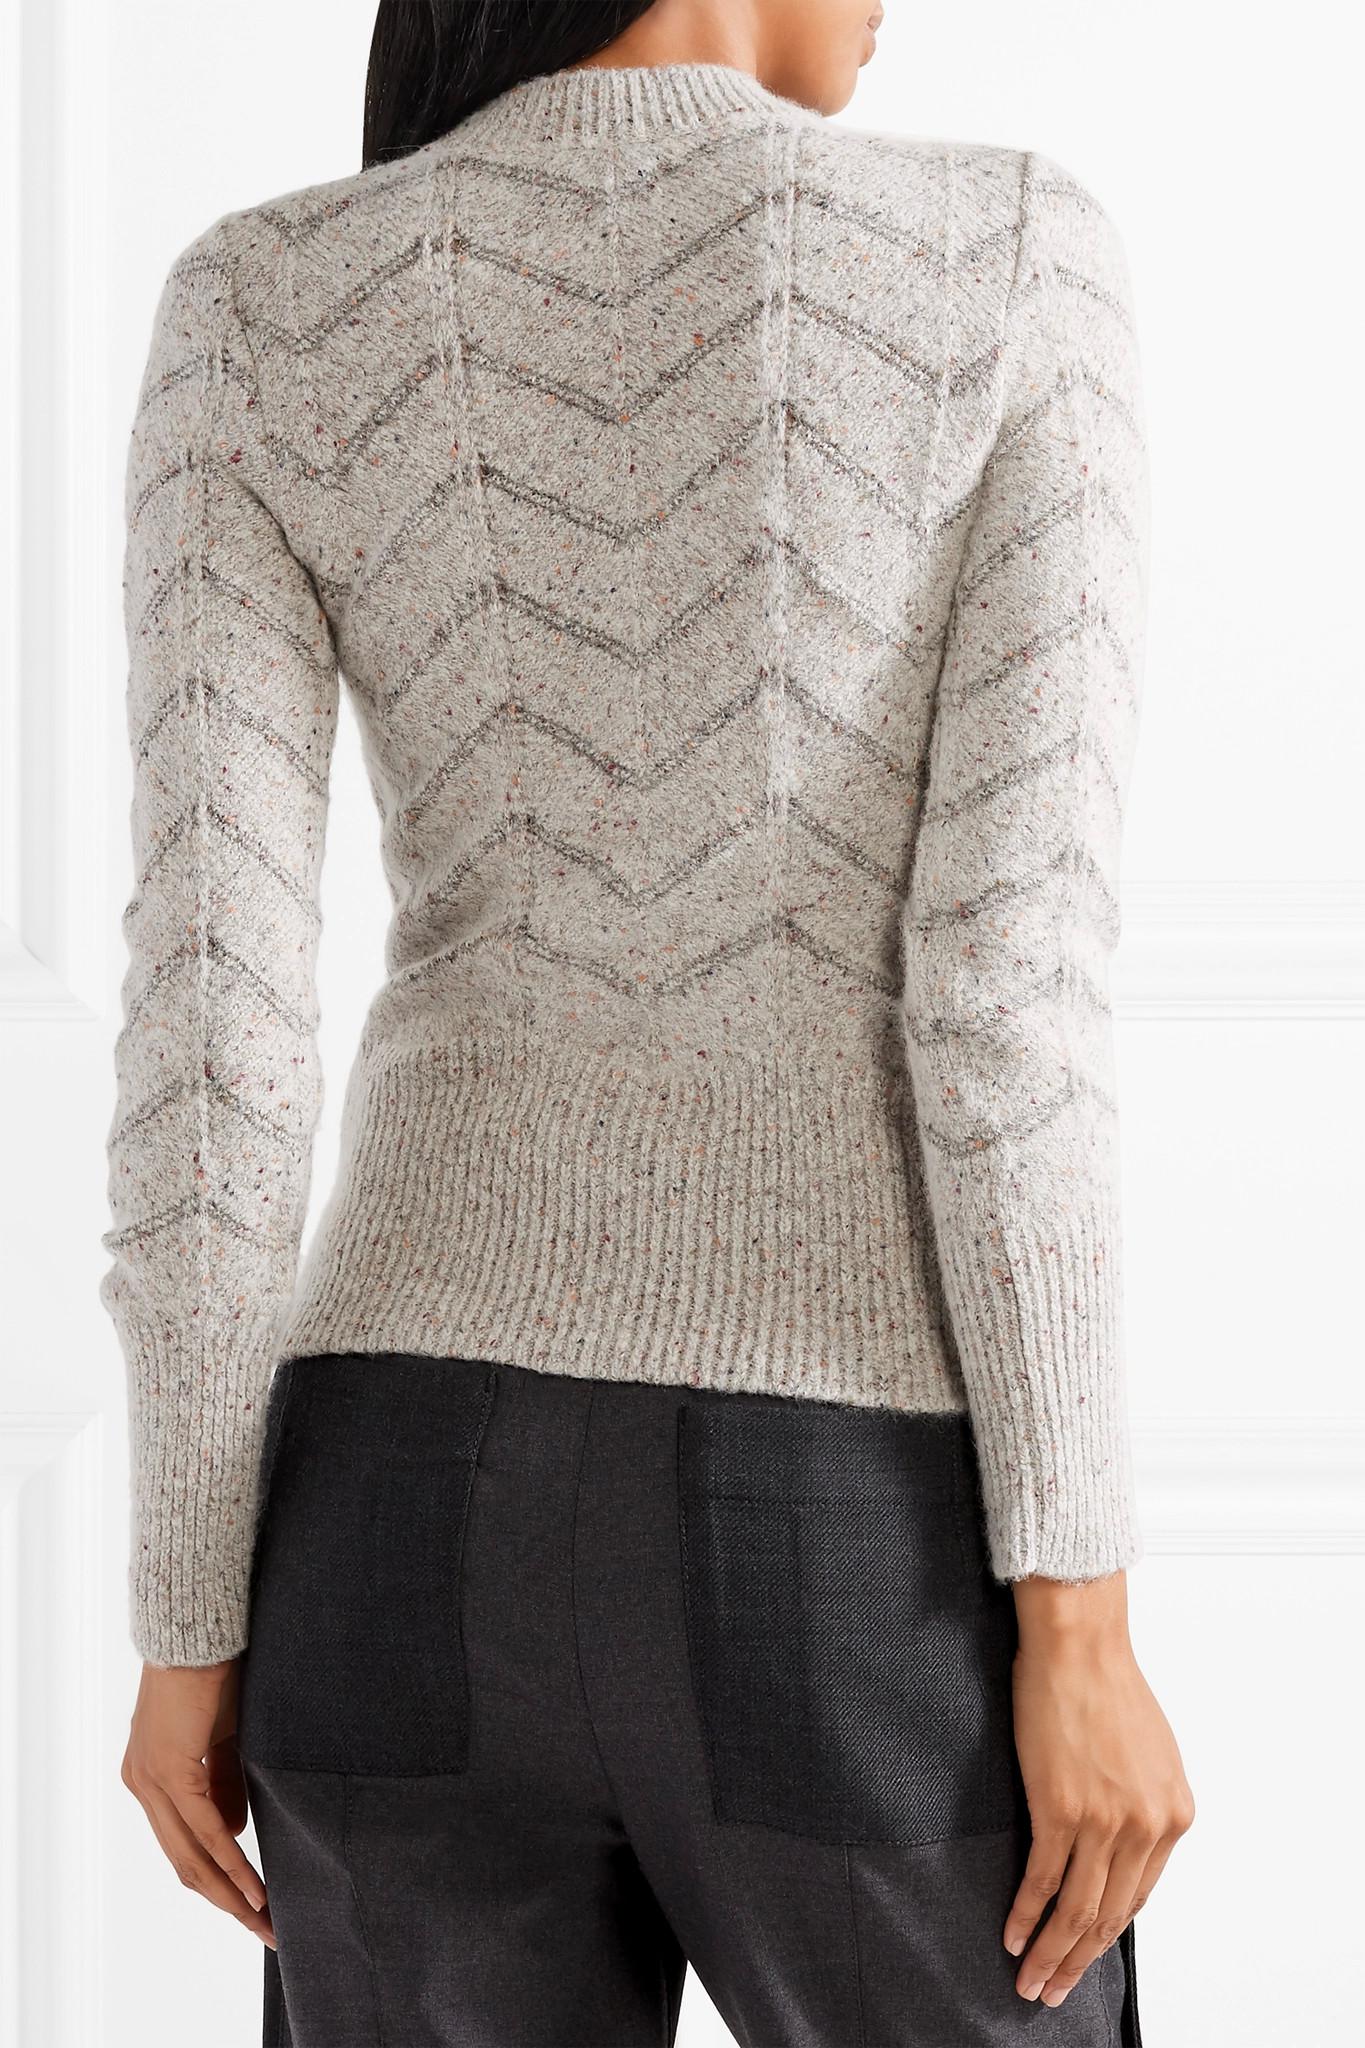 Lyst - Isabel Marant Elson Mélange Knitted Sweater in Gray